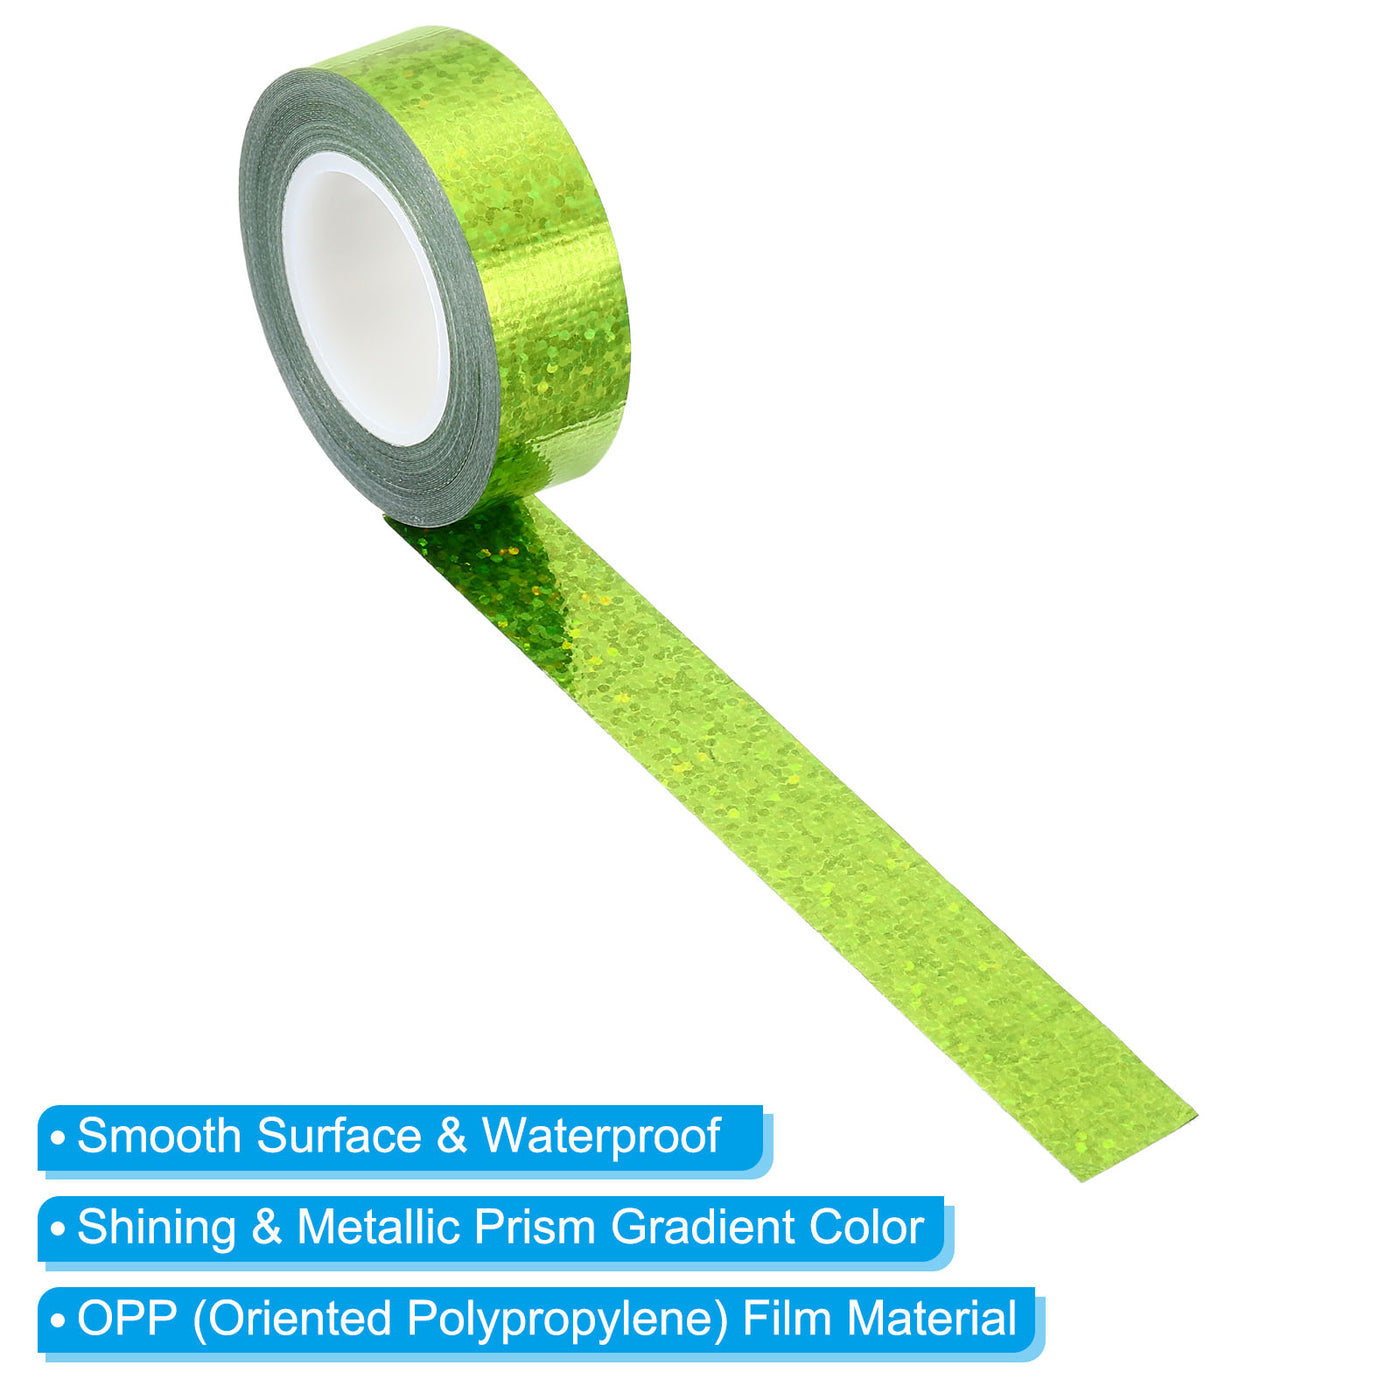 Harfington Sparkle Glitter Tape 15mm x 5m, 2 Pack Art Prism Tapes Self-Adhesive Green